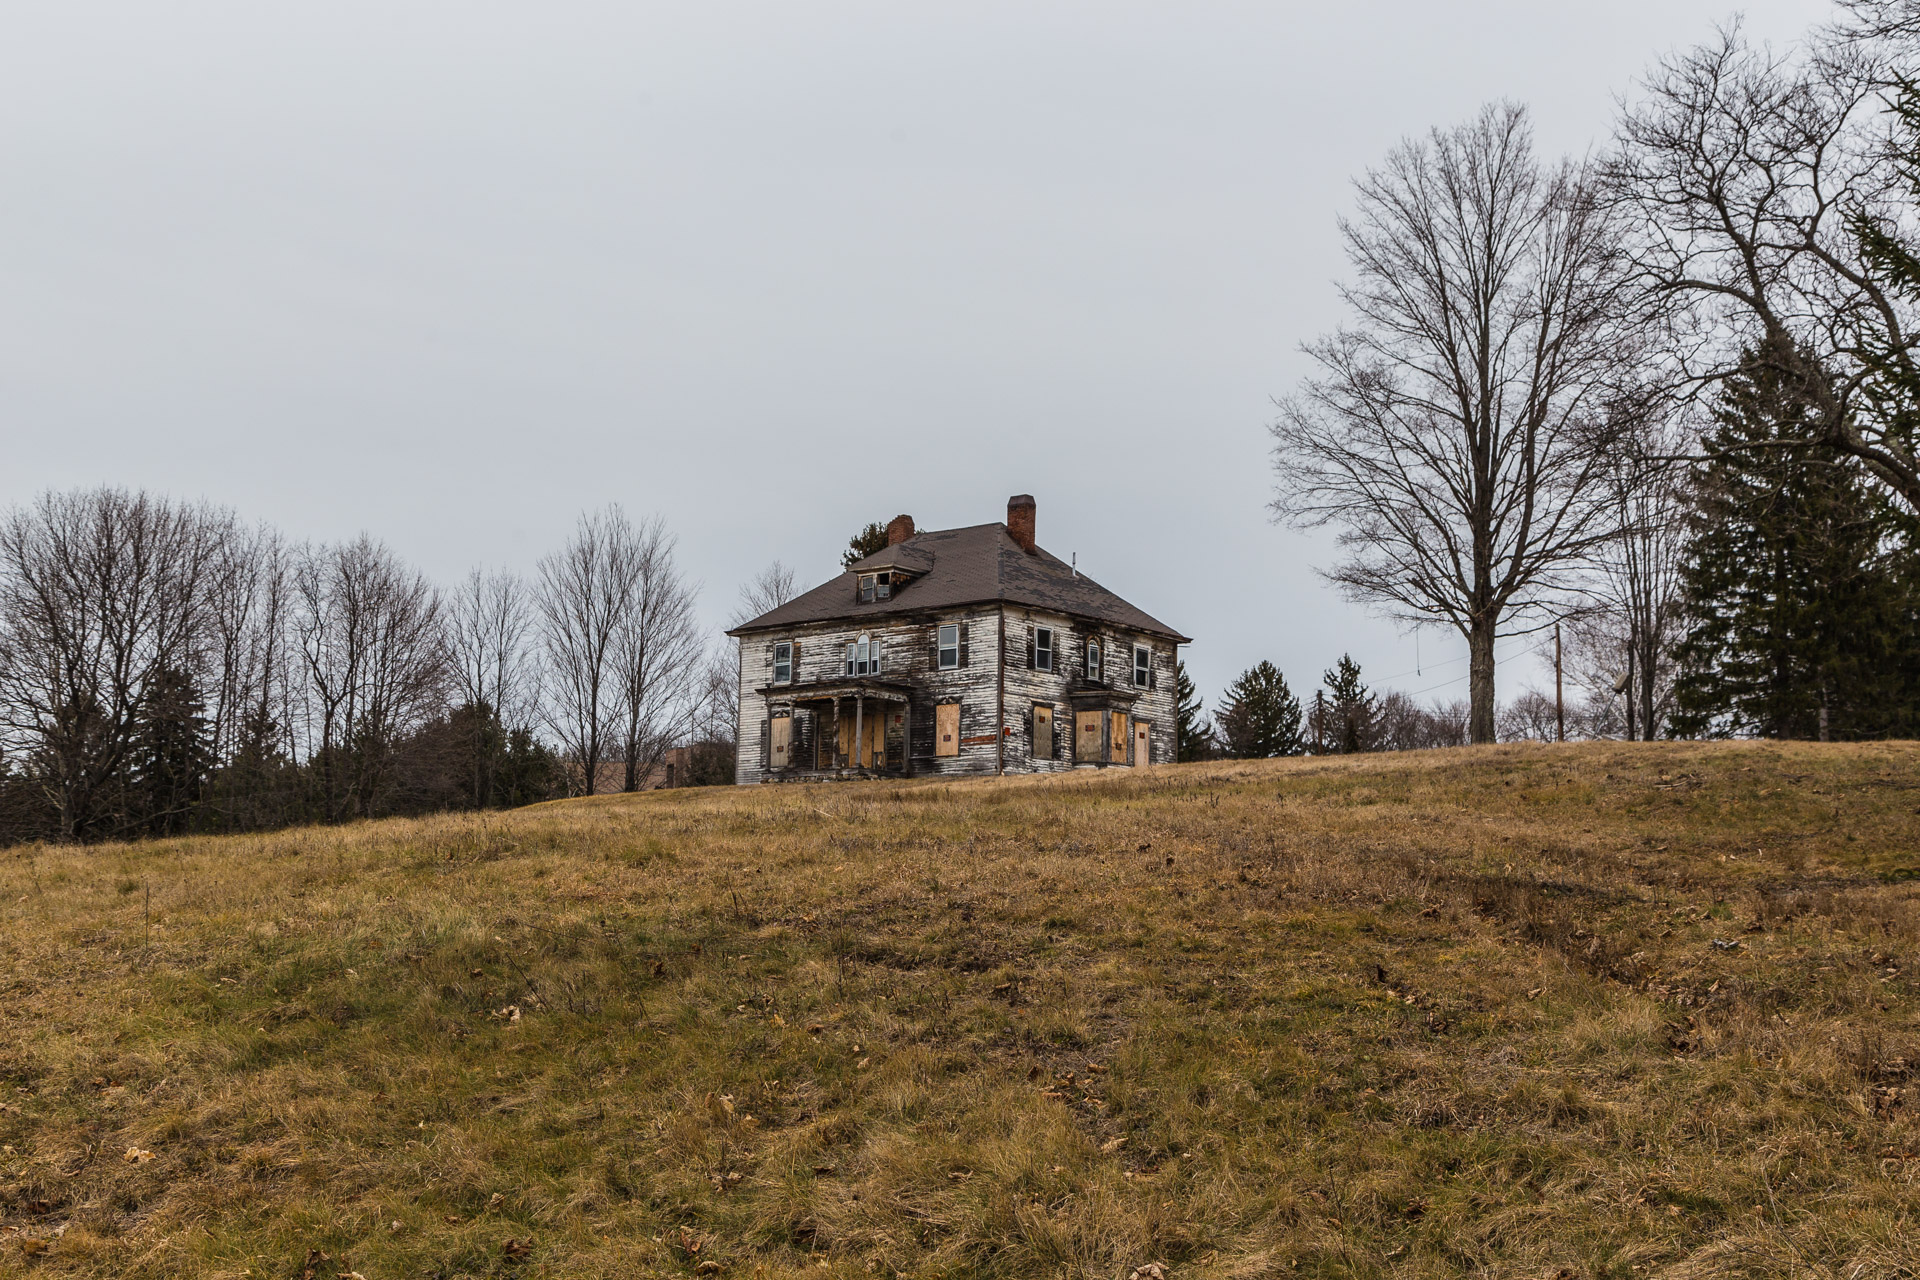 Millbrook, New York - A Stately Decaying House